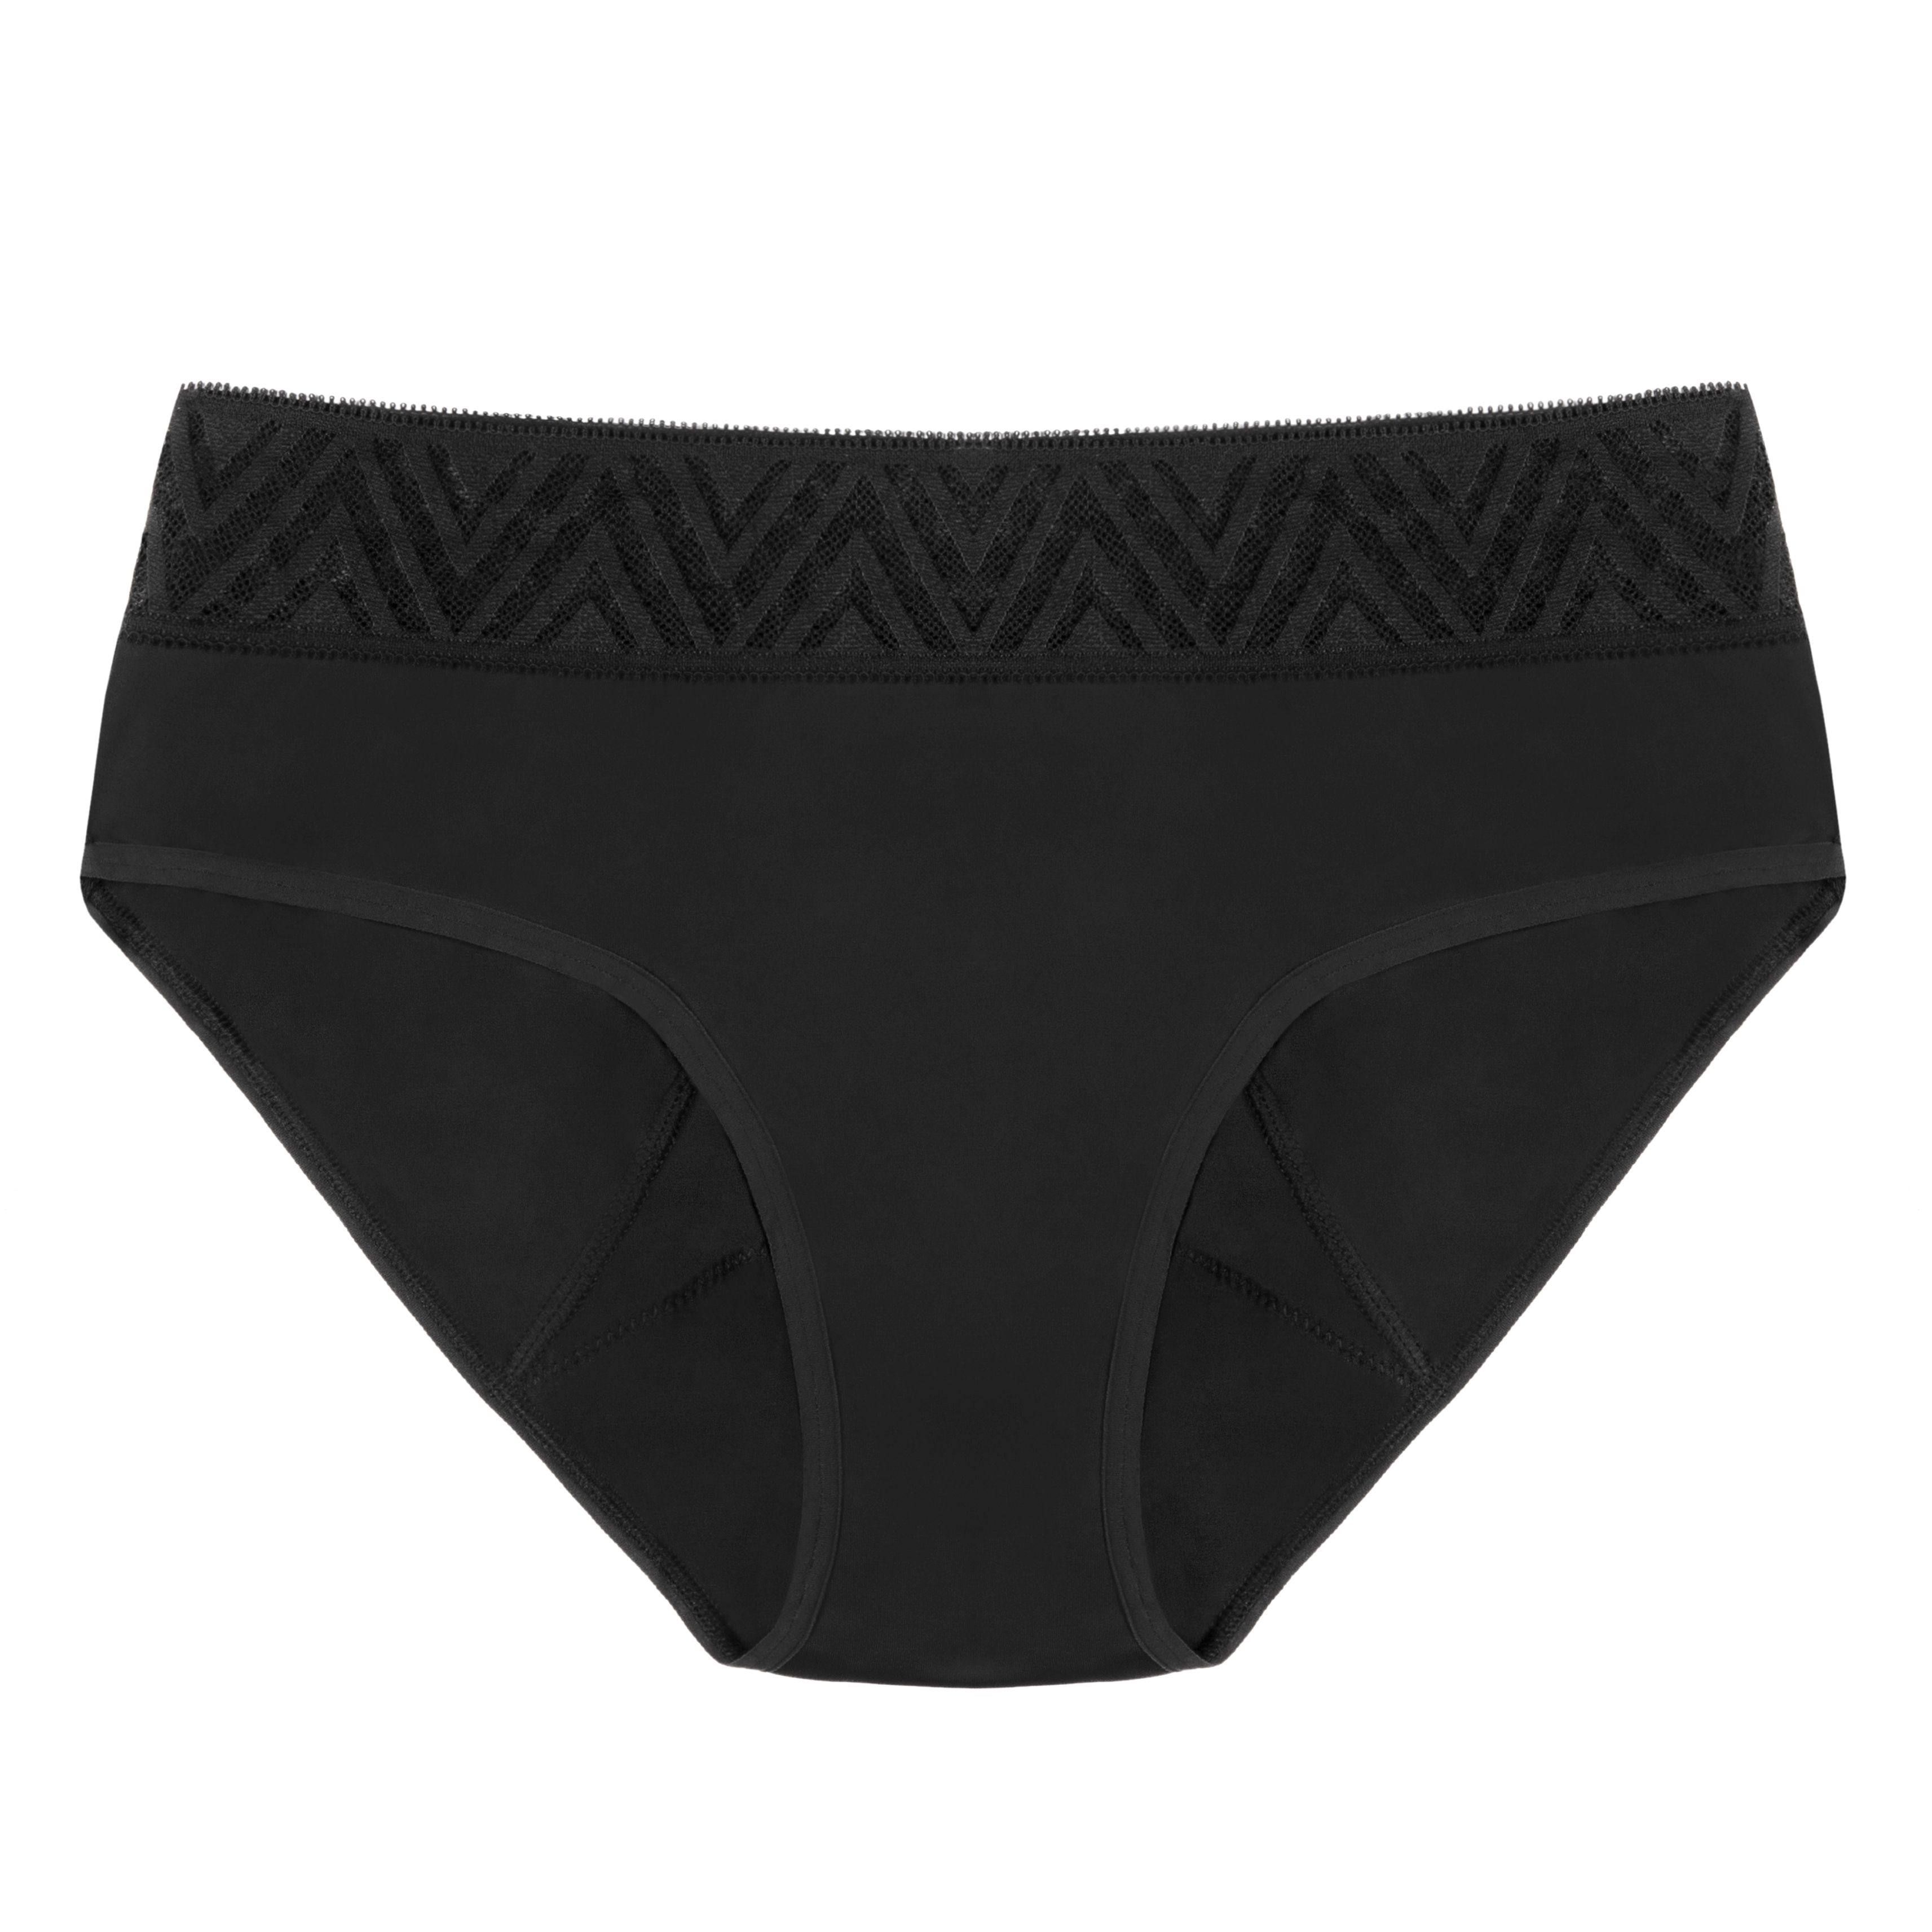 DISCThinx Period Proof Lace Hiphugger -Black